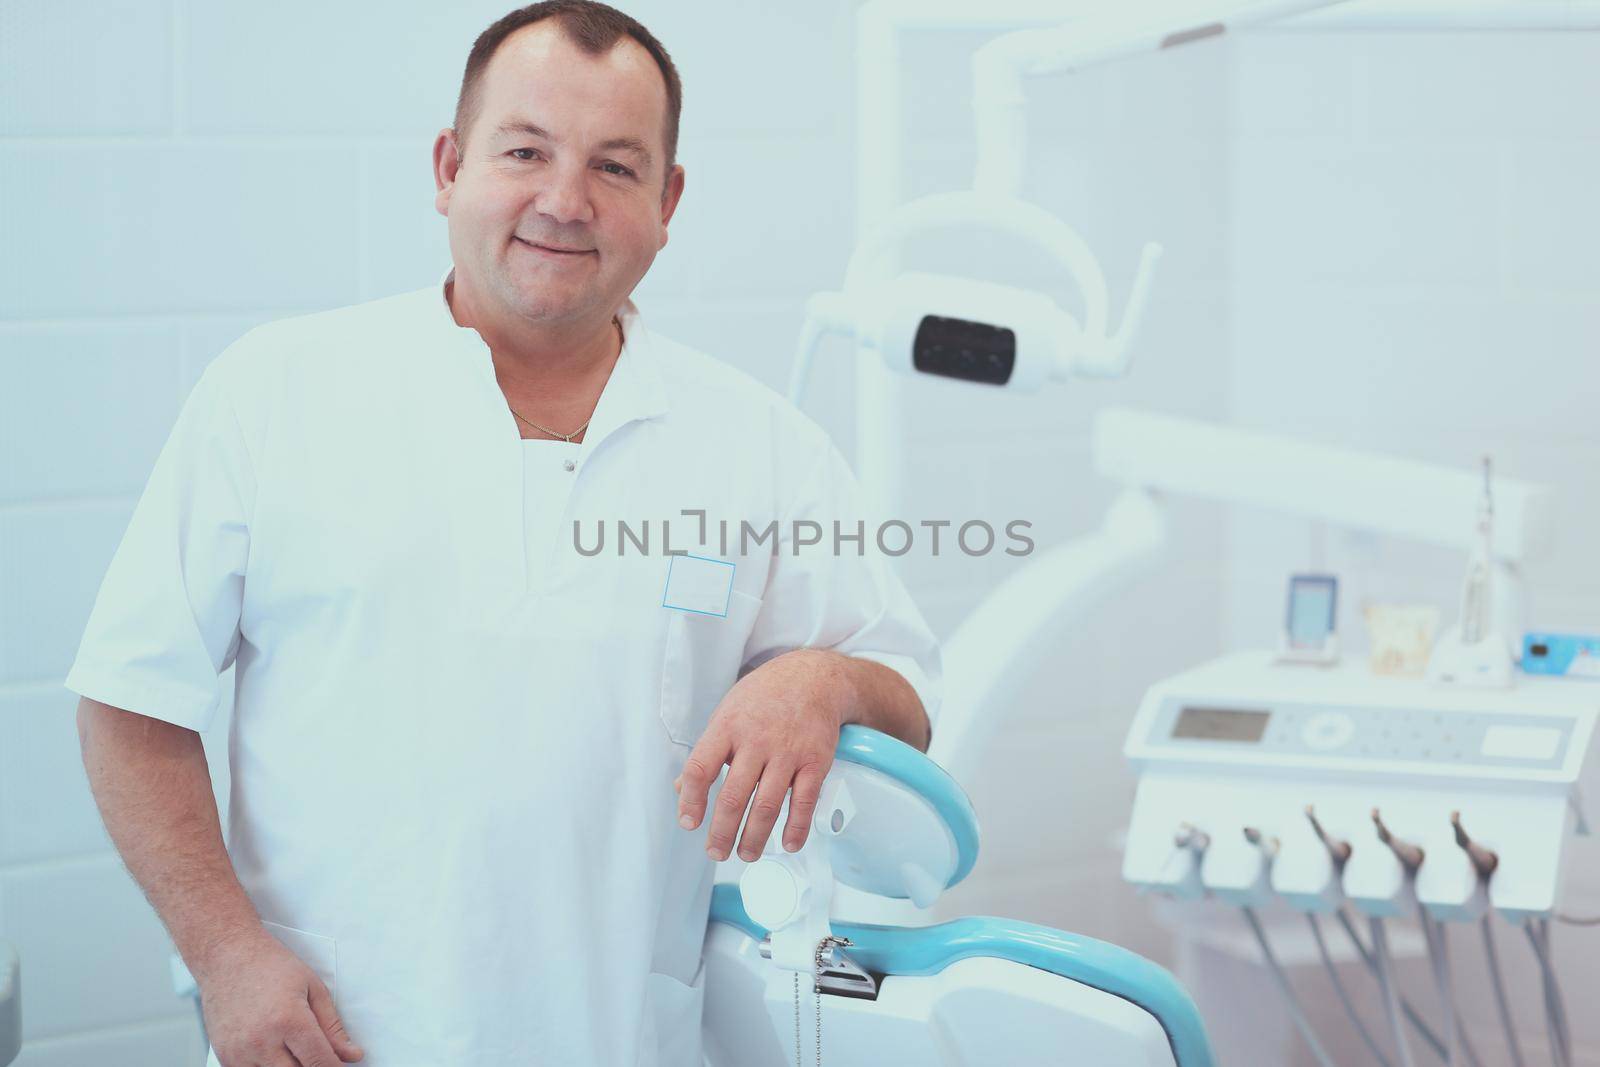 Portrait of a smiling dentist standing in dental clinic.